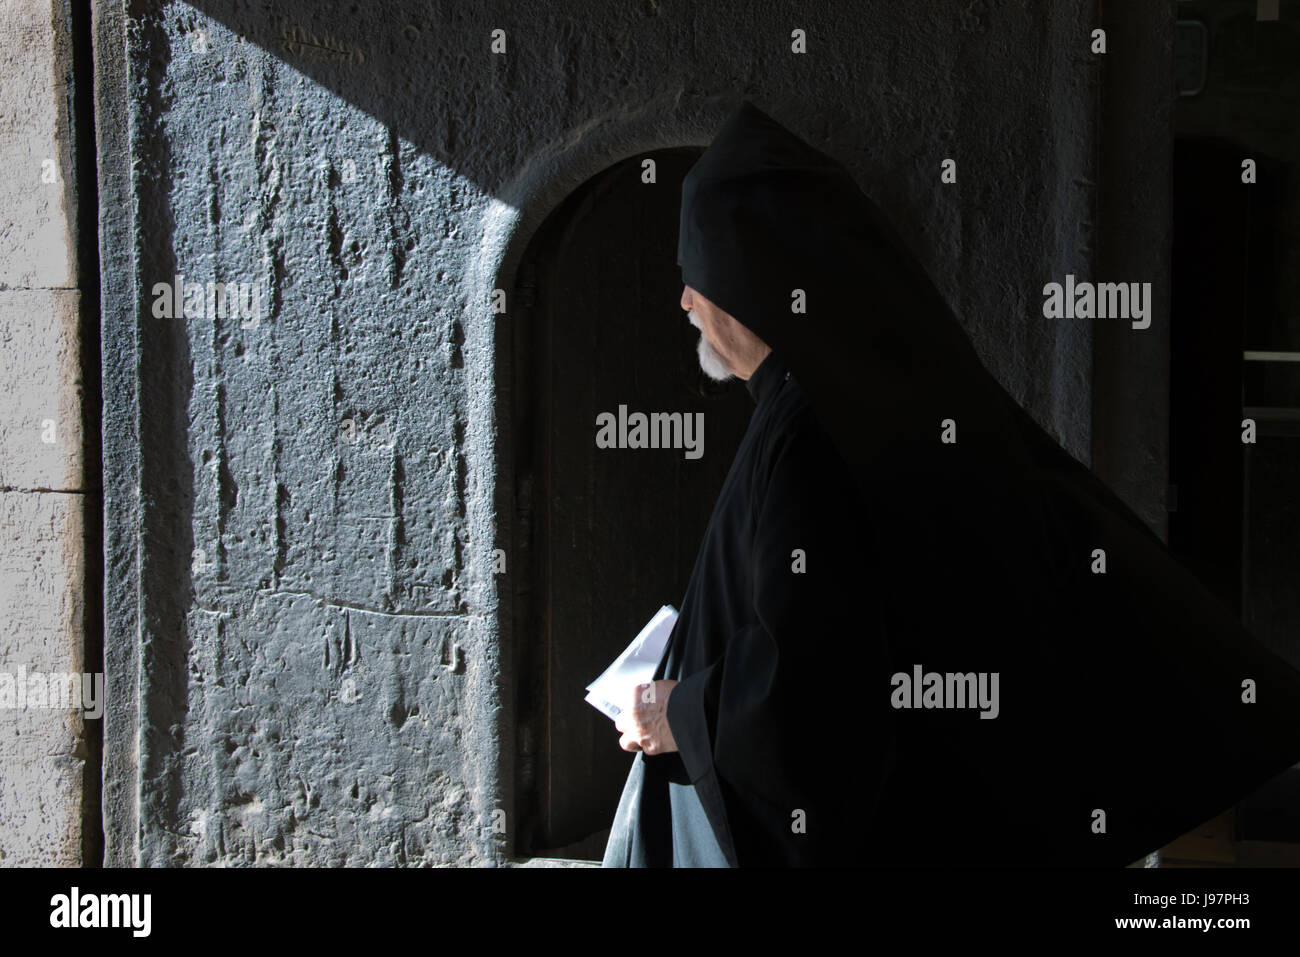 An Armenian orthodox priest exits the Cathedral of St. James, Old City of Jerusalem, April 17, 2014. Stock Photo